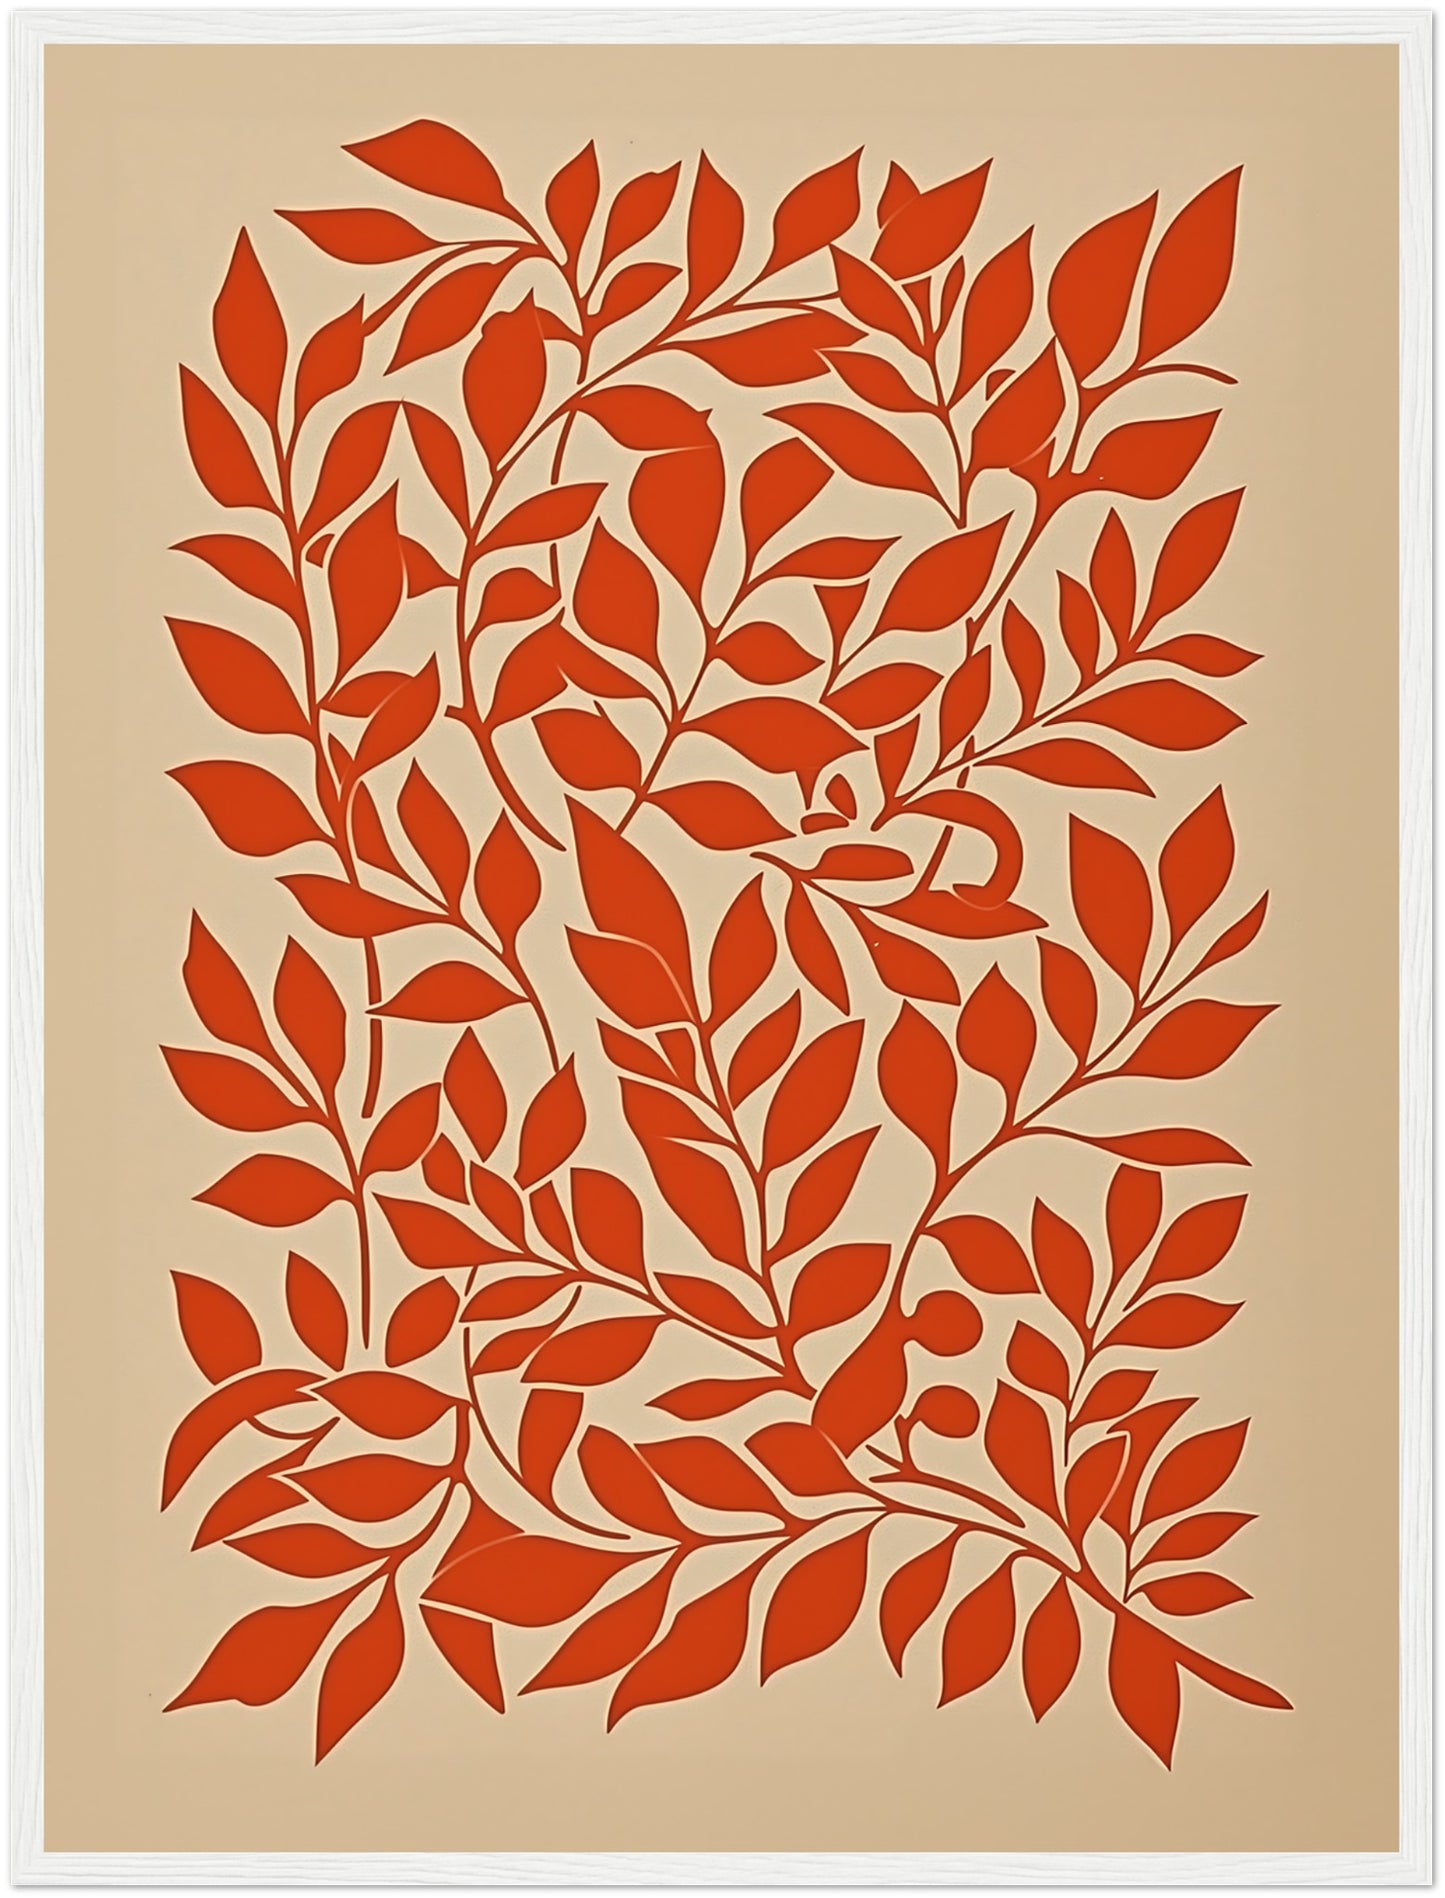 A framed artwork featuring a stylized red leaf pattern on a cream background.